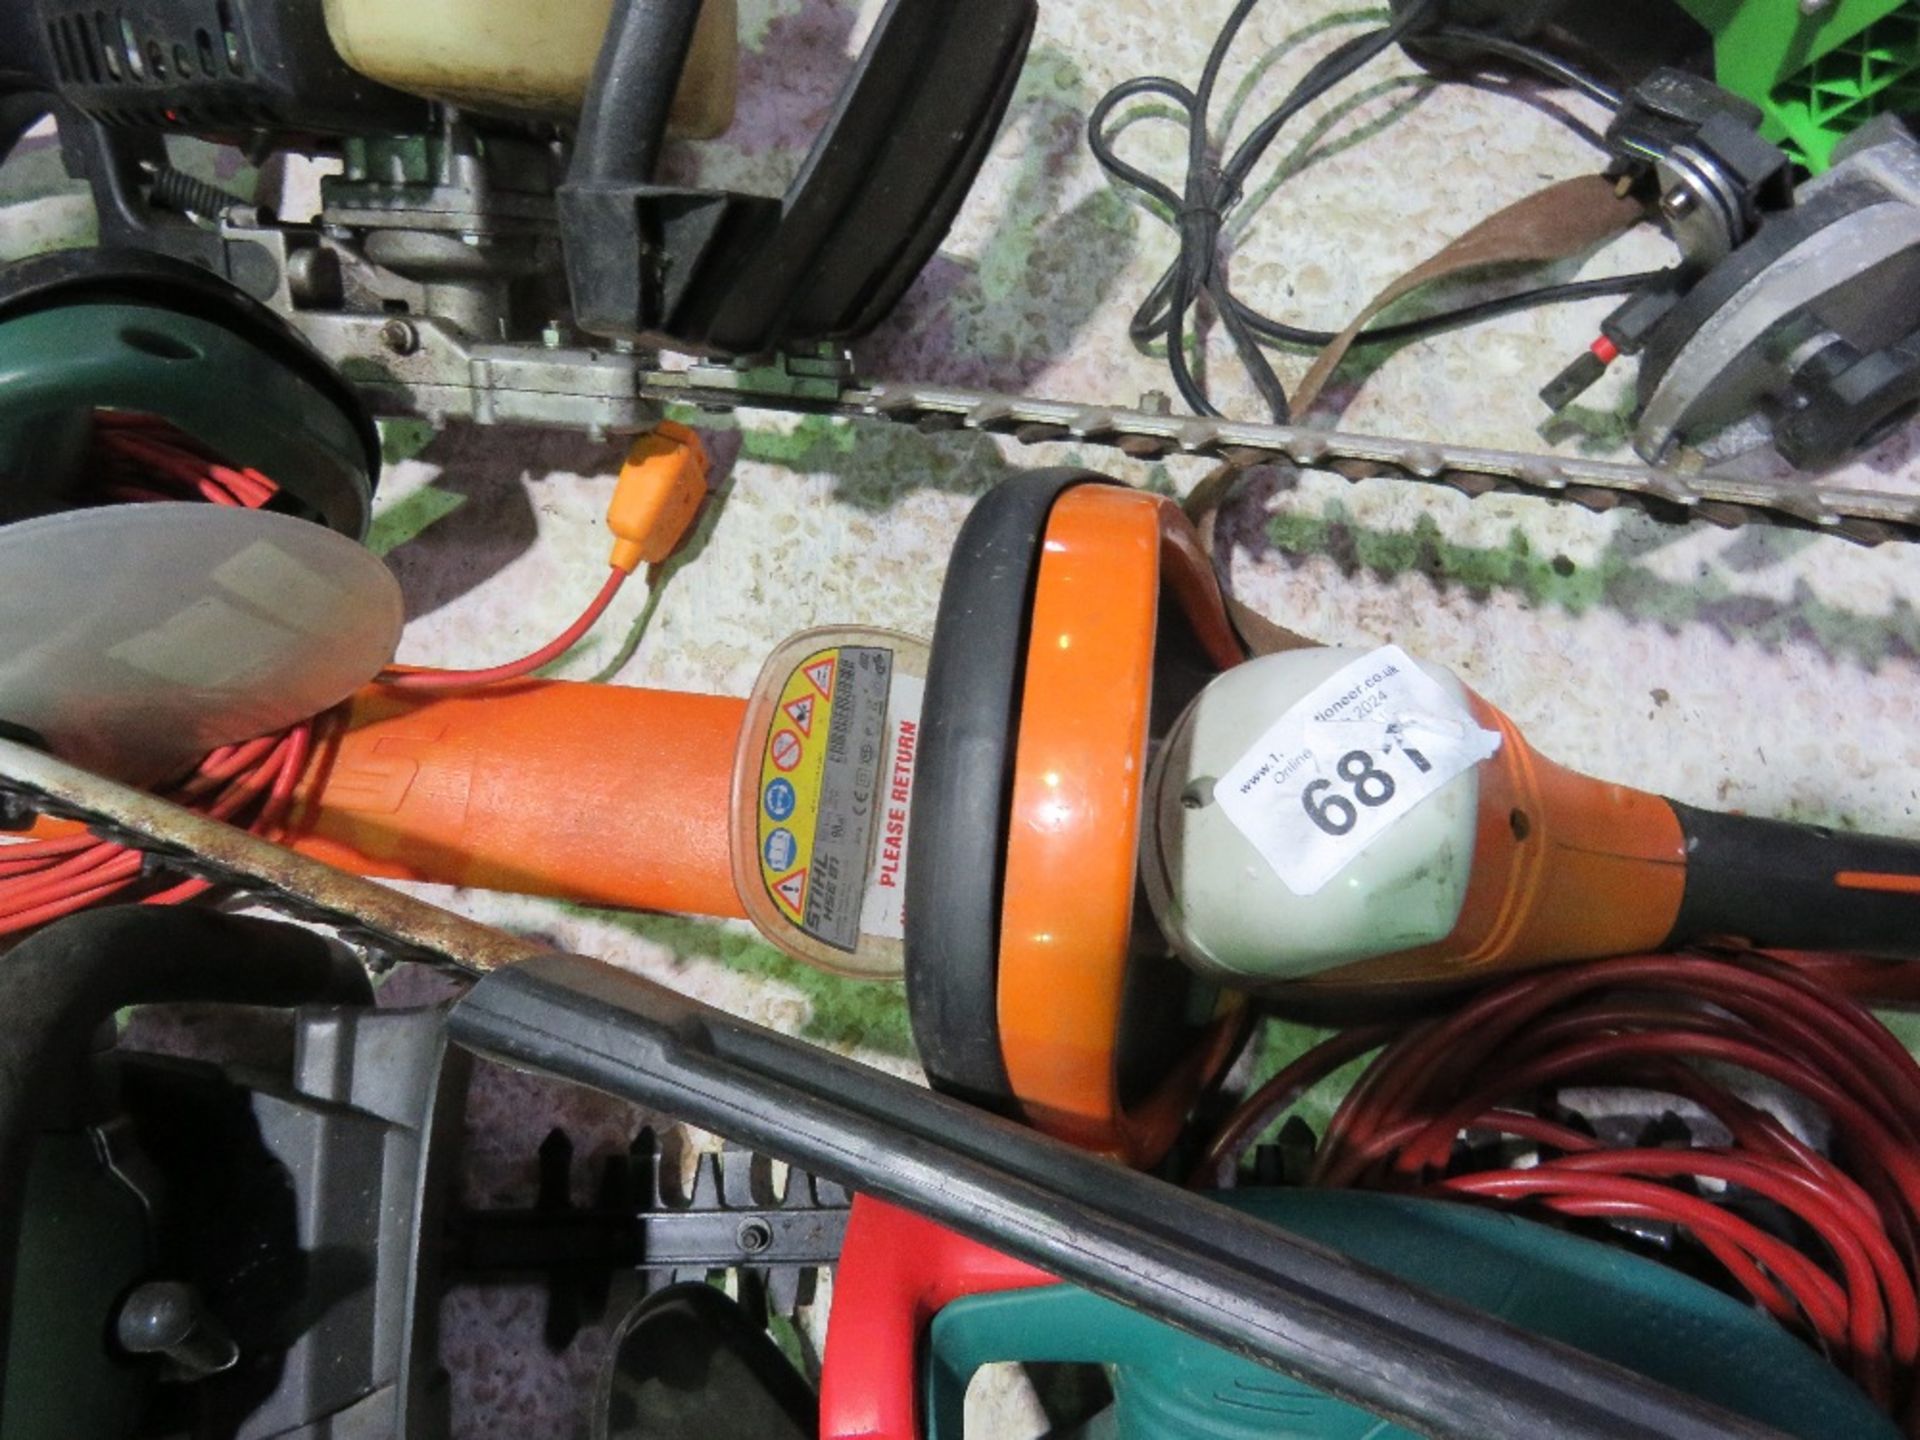 2 X PETROL HEDGE CUTTERS PLUS 2 X ELECTRIC HEDGE CUTTERS AND A CHAINSAW SHARPENER. - Image 8 of 14